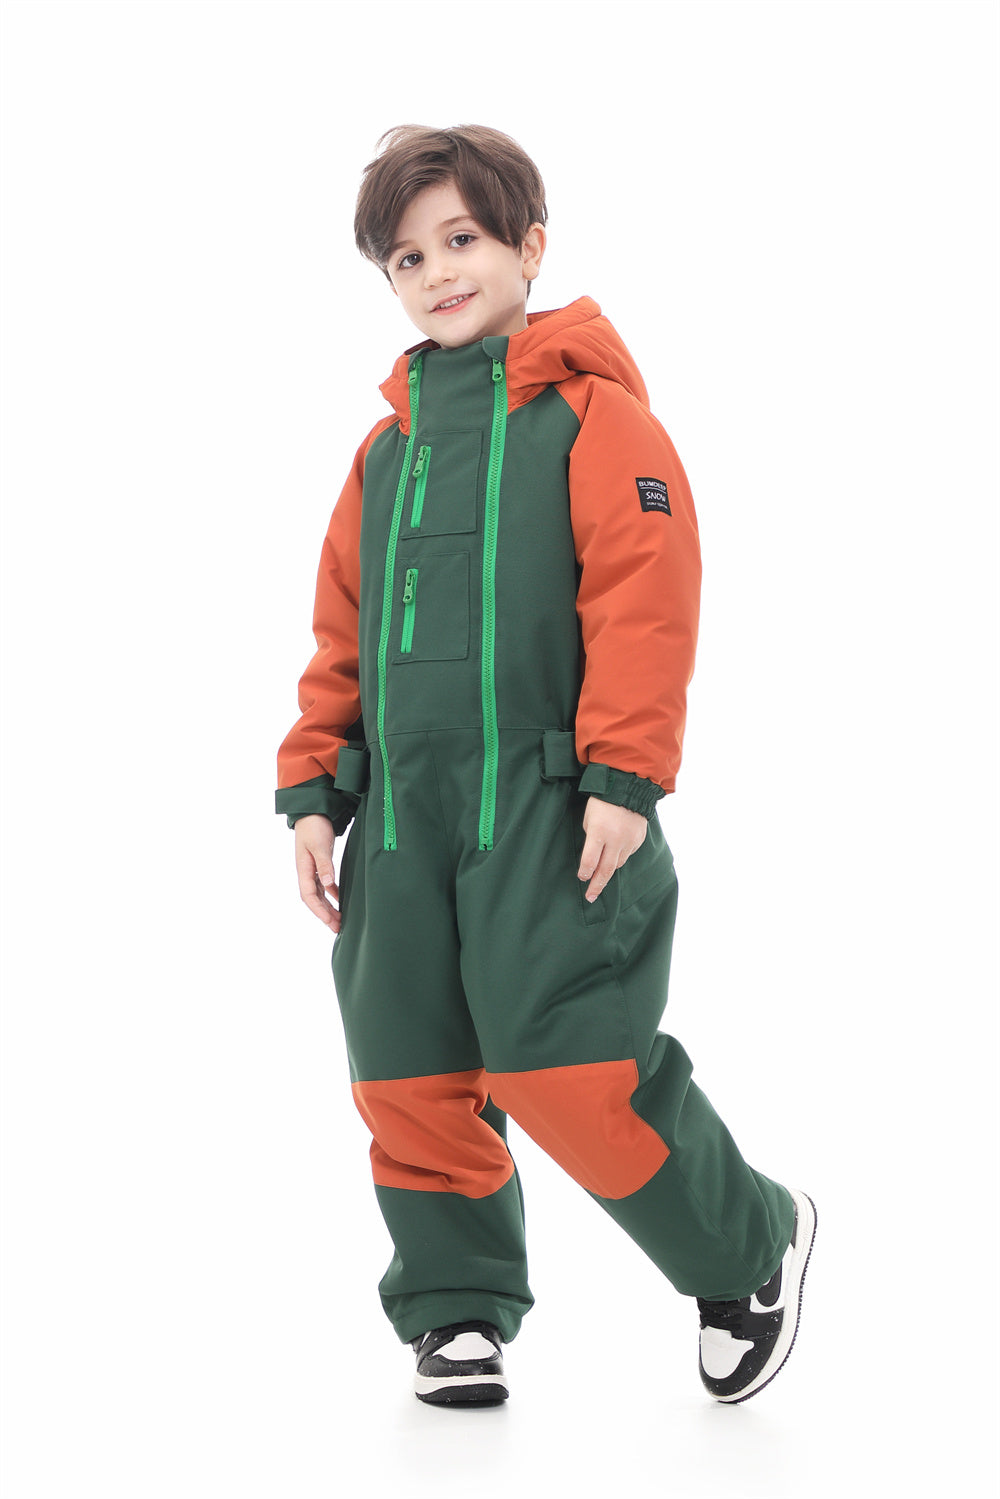 skpabo Jumpsuit Girls Boys Hooded Outfits Romper Thick Coats Warm